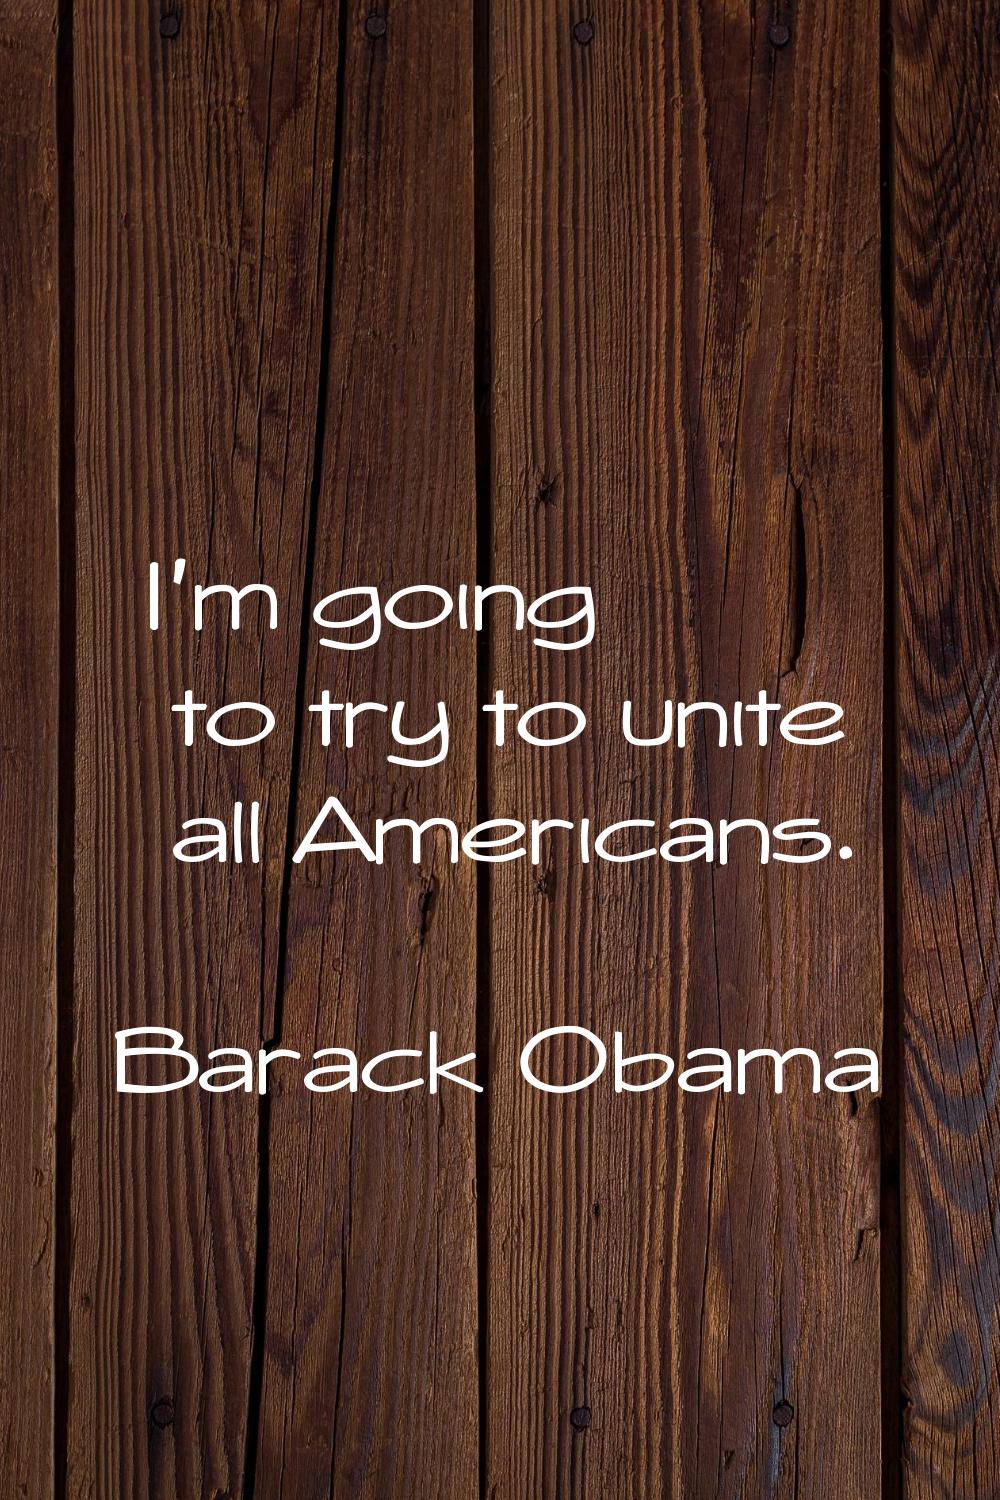 I'm going to try to unite all Americans.